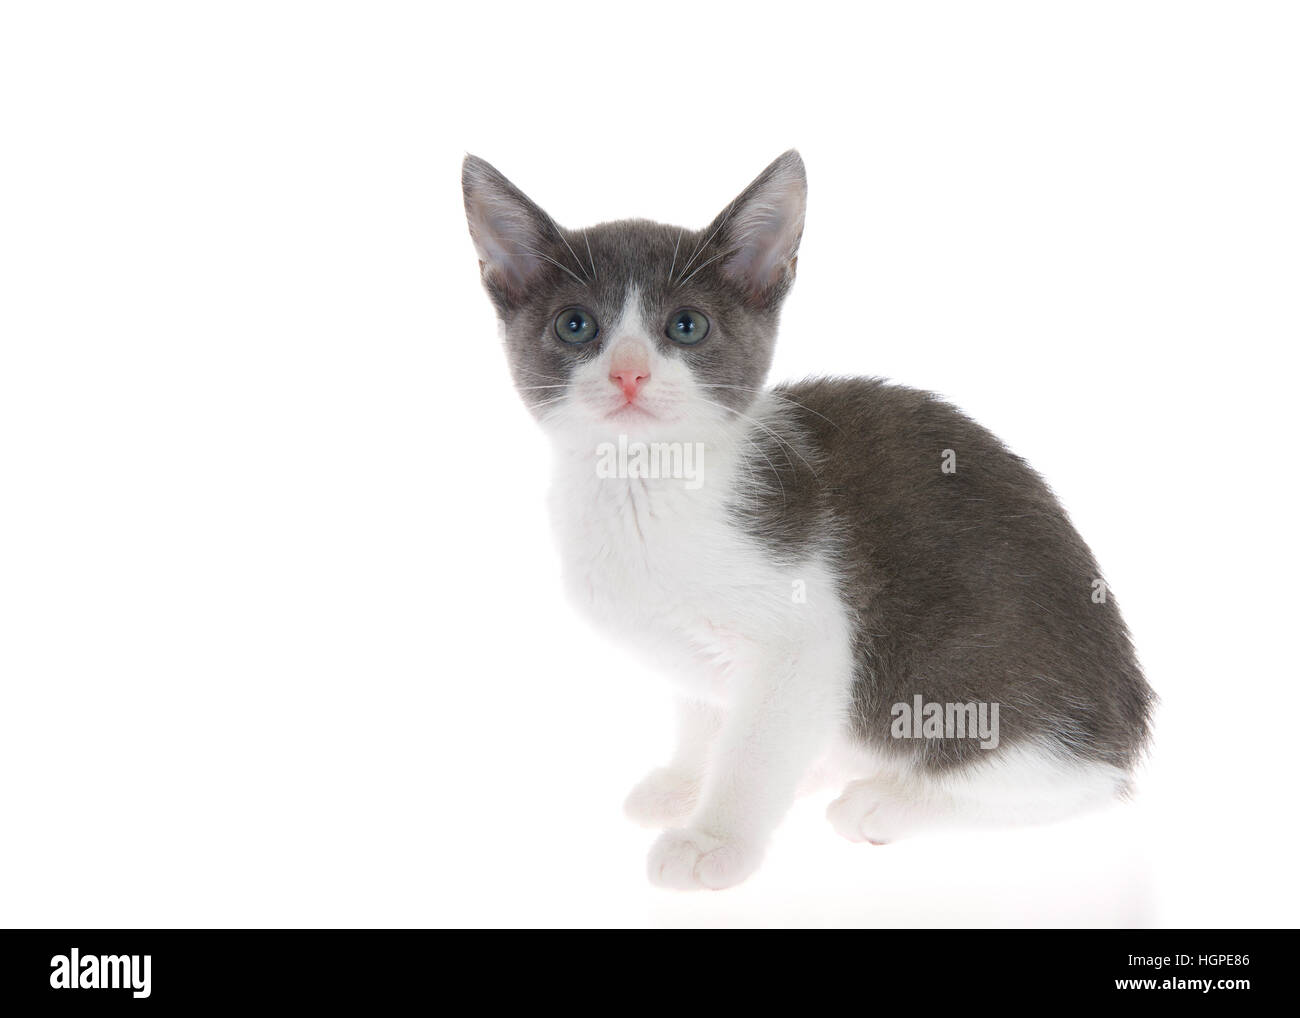 grey and white tabby kitten standing on slightly reflective surface looking at viewer, listening. Isolated on white background. Stock Photo